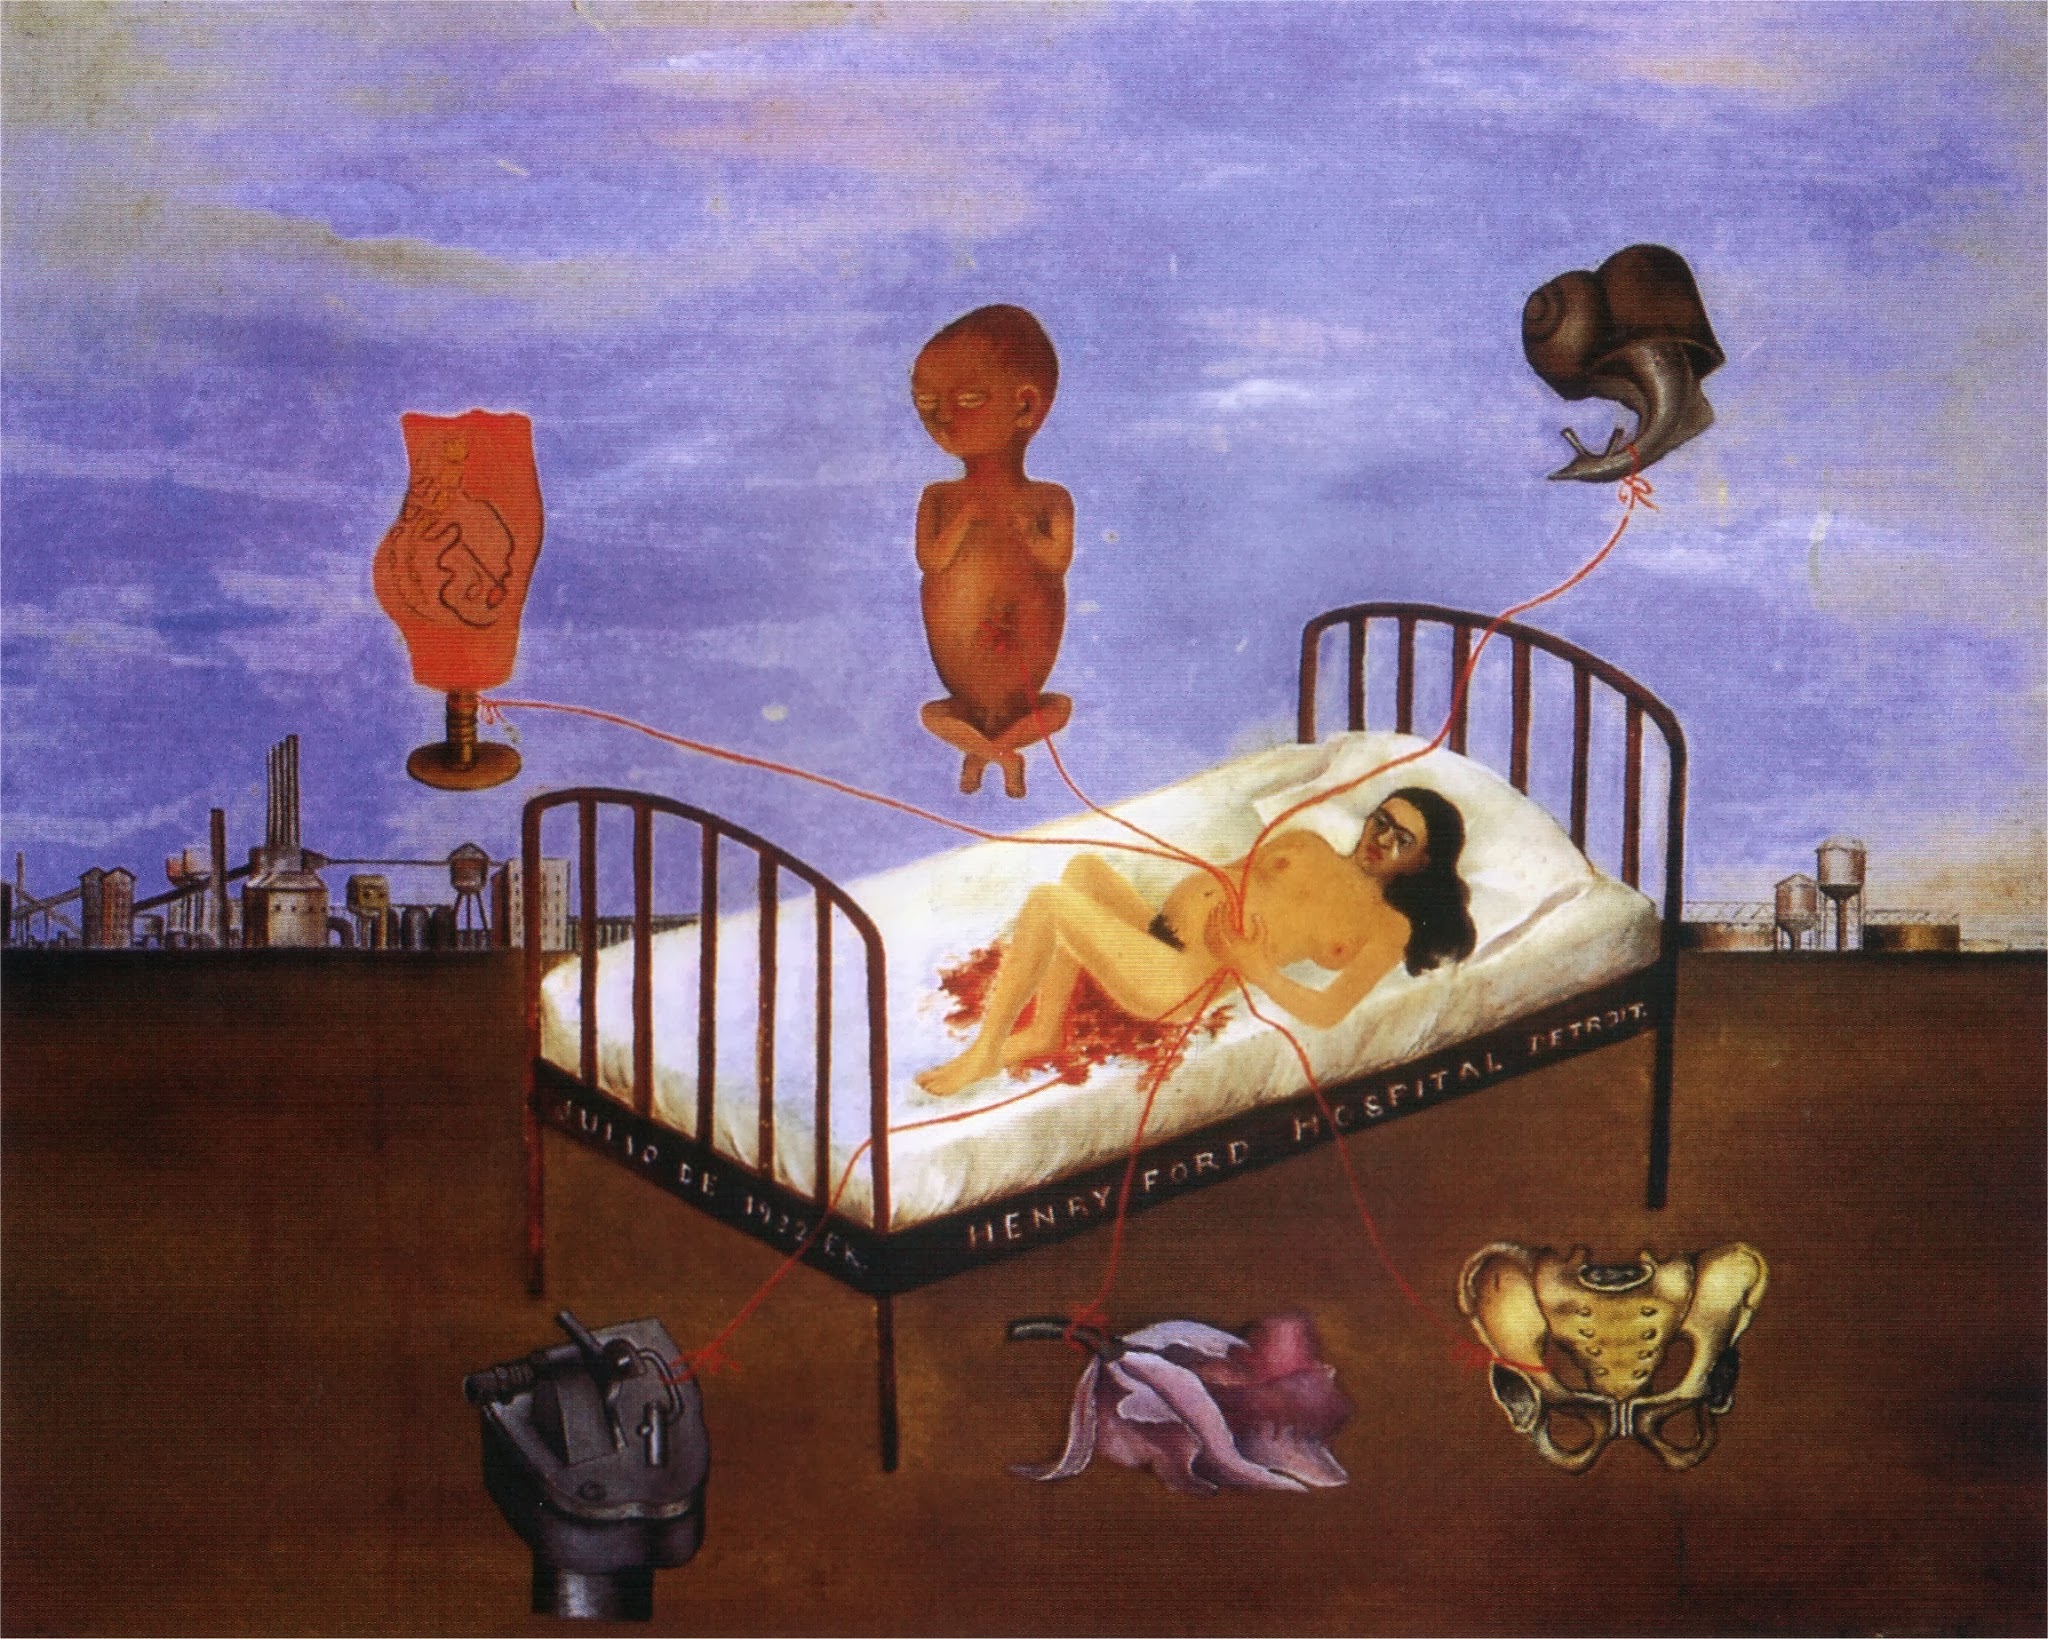 Henry ford hospital painting by frida kahlo #4